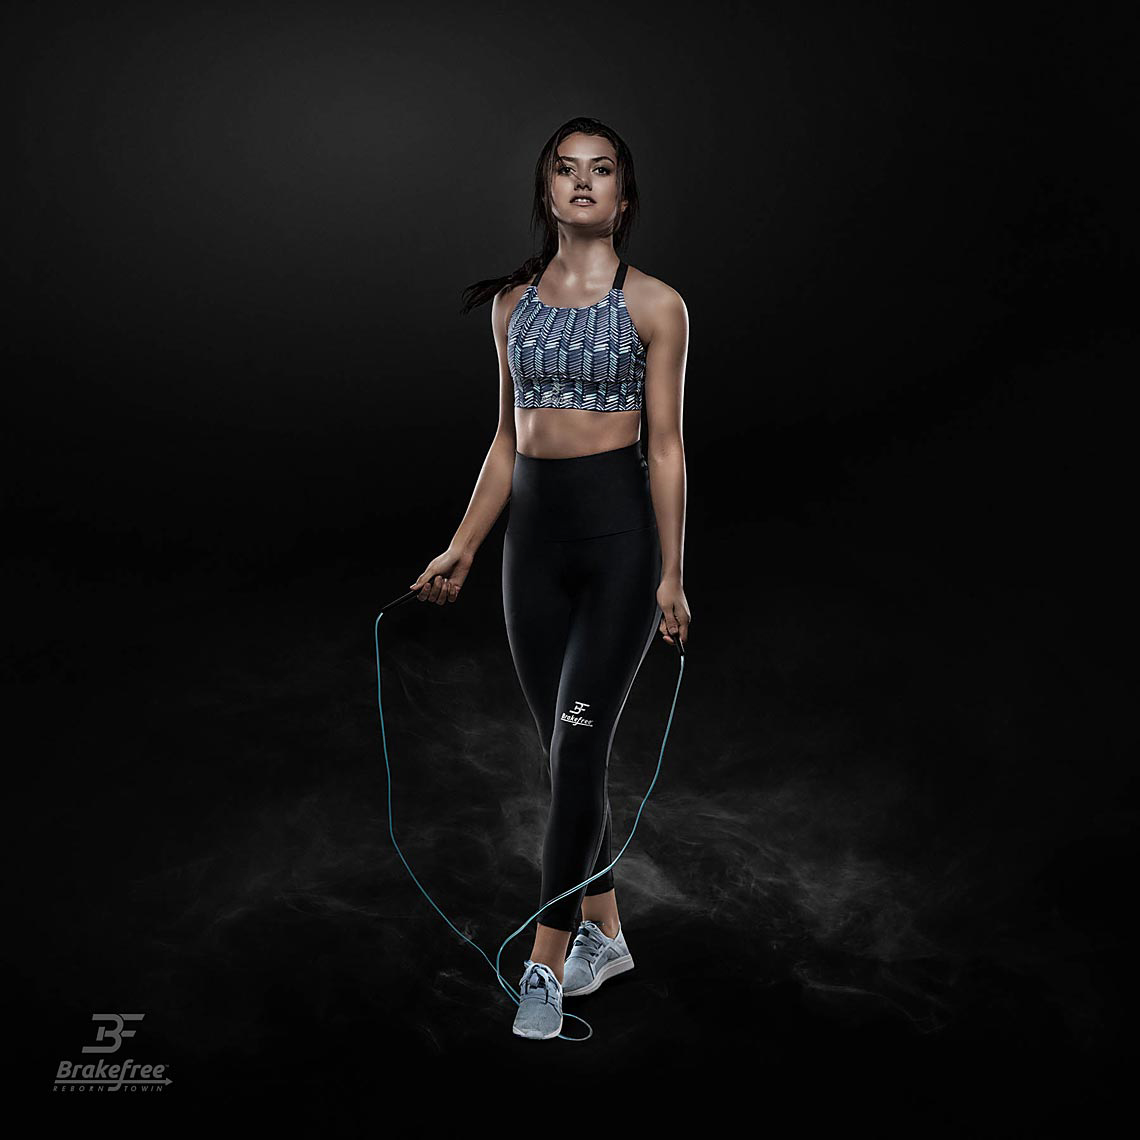 Best Advertising Photographer by Vikram Bawa in India, Breakfree Fitness Brand shoot,  Model, Advertising  shoot,Sports Photographer, Best Indian Photographer, Best Fashion Photographer Vikram Bawa, Mumbai, India